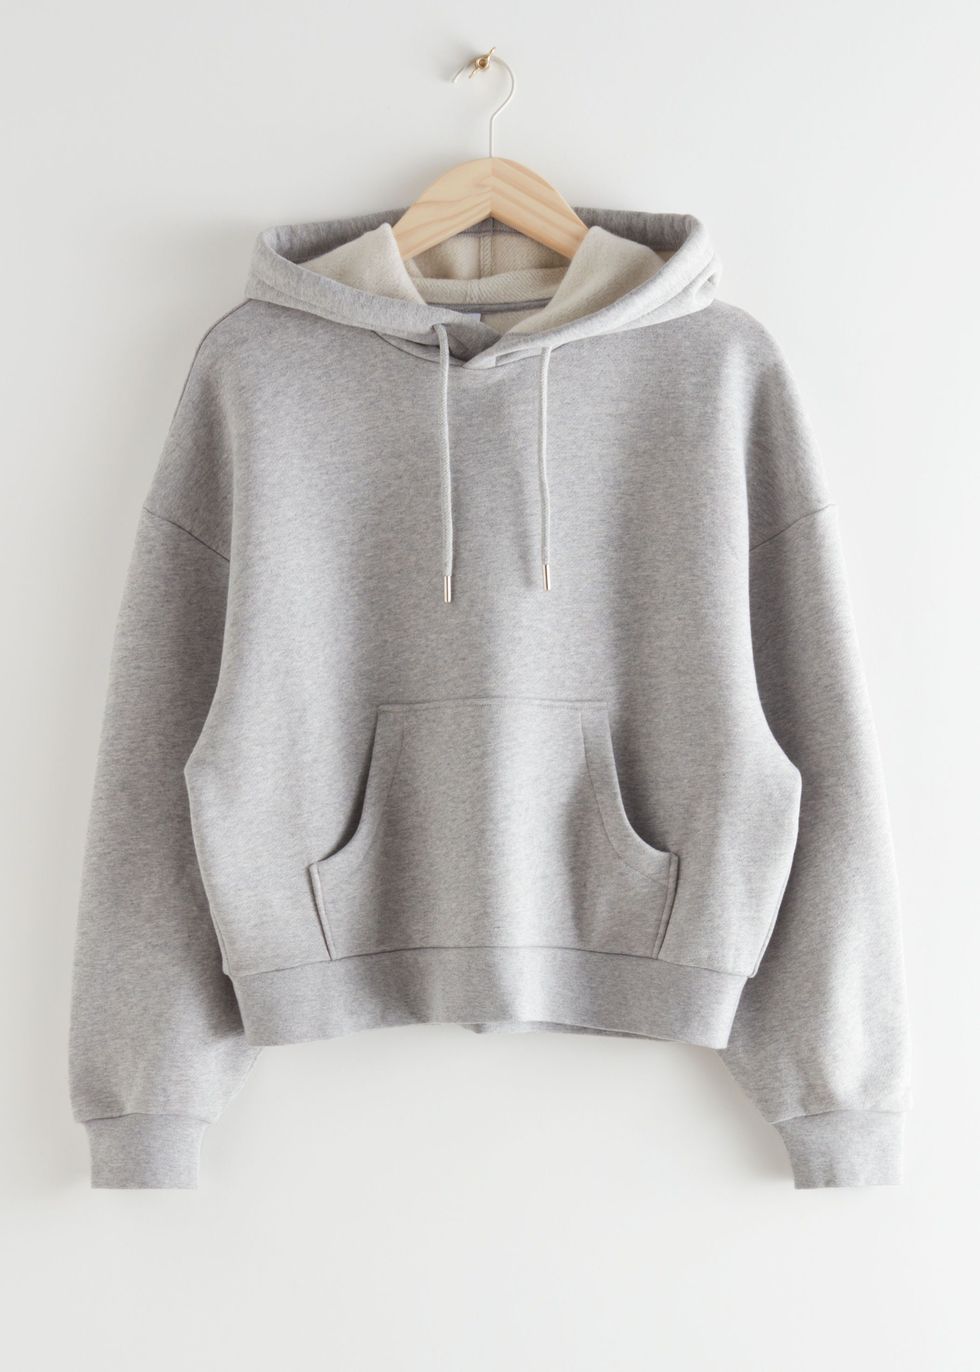  Other Stories Oversized Hooded Boxy Sweatshirt in Black